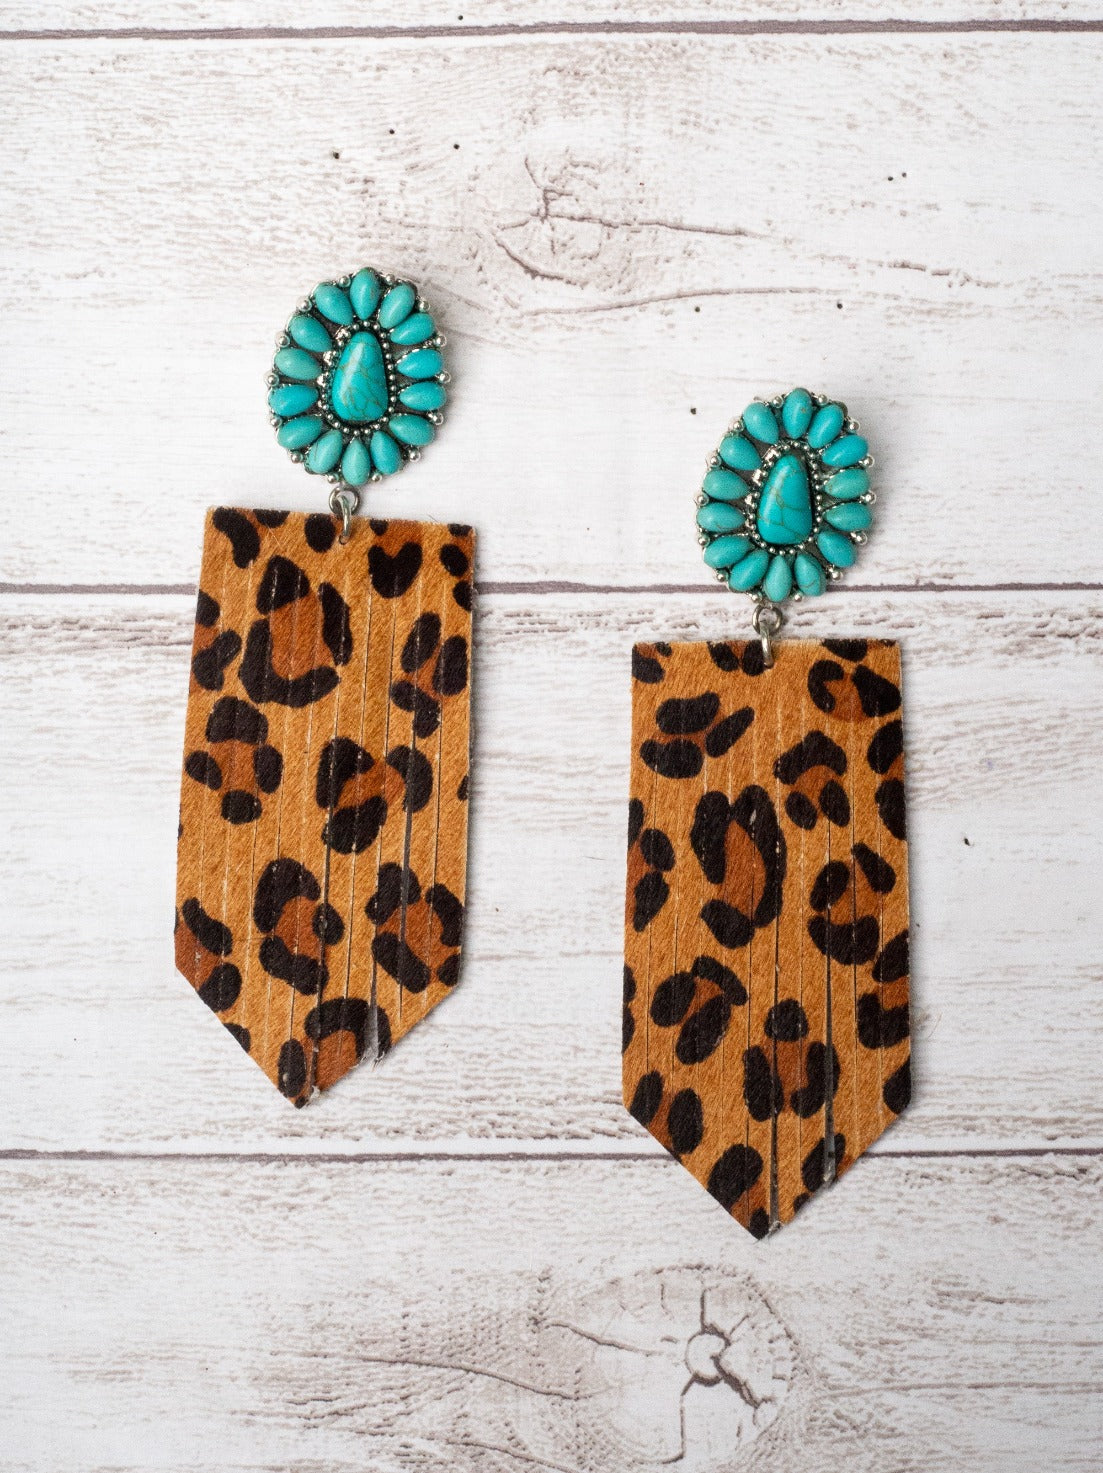 I'LL BE YOUR RANCH HAND TURQUOISE FLORAL CONCHO WITH BROWN LEOPARD FRINGE EARRINGS